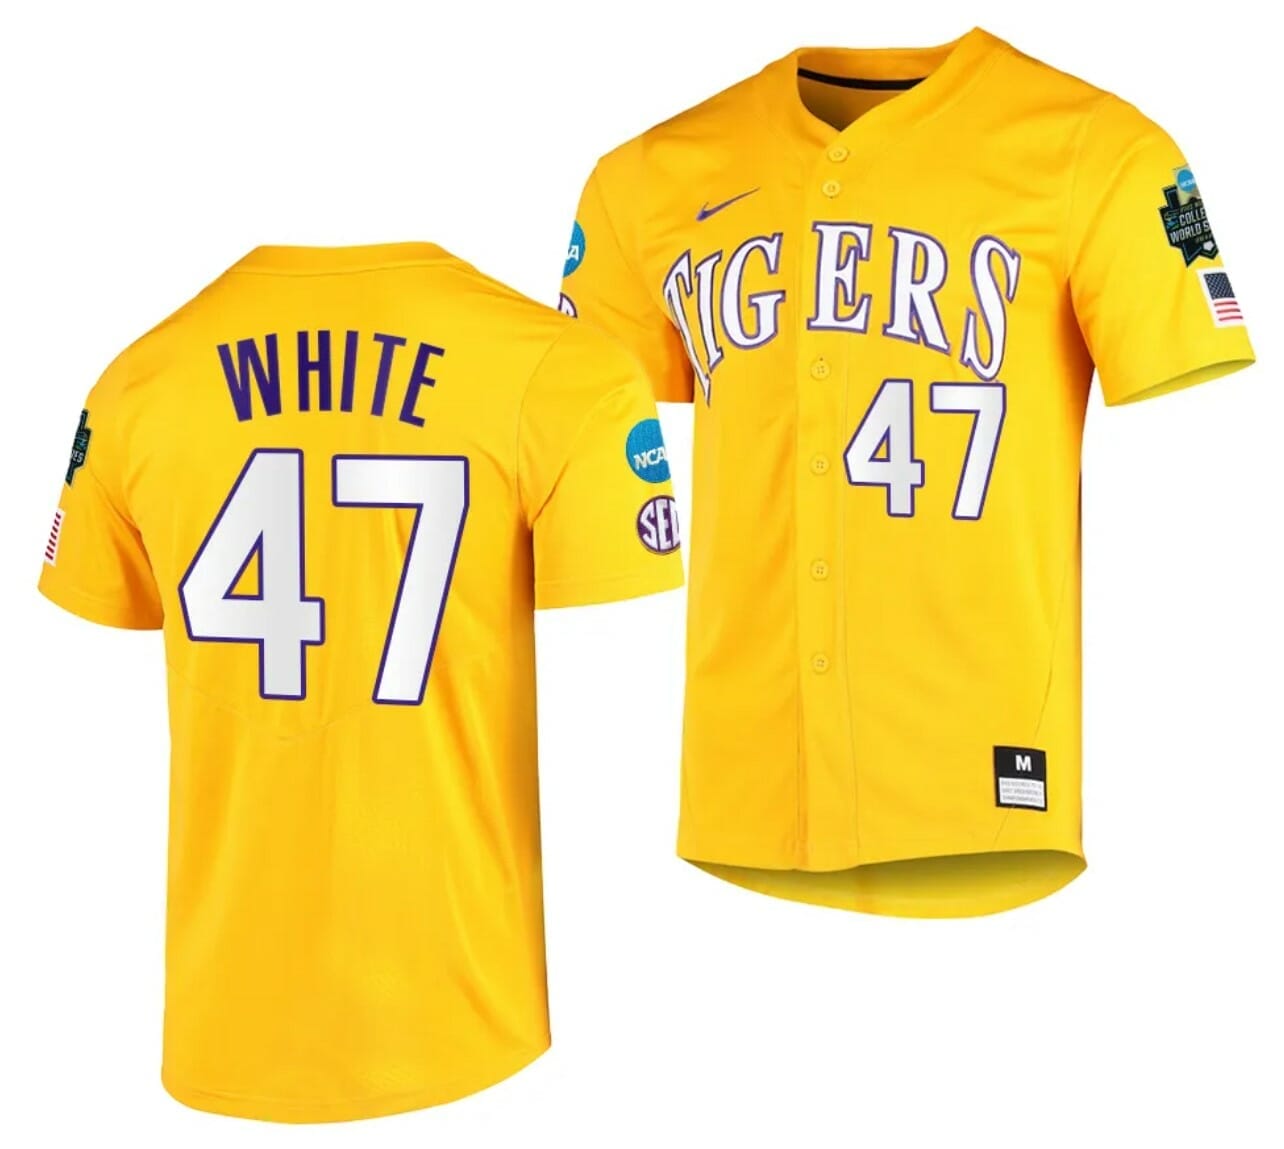 Pittsburgh Knights Custom Elite Legacy Jersey (Size: S)